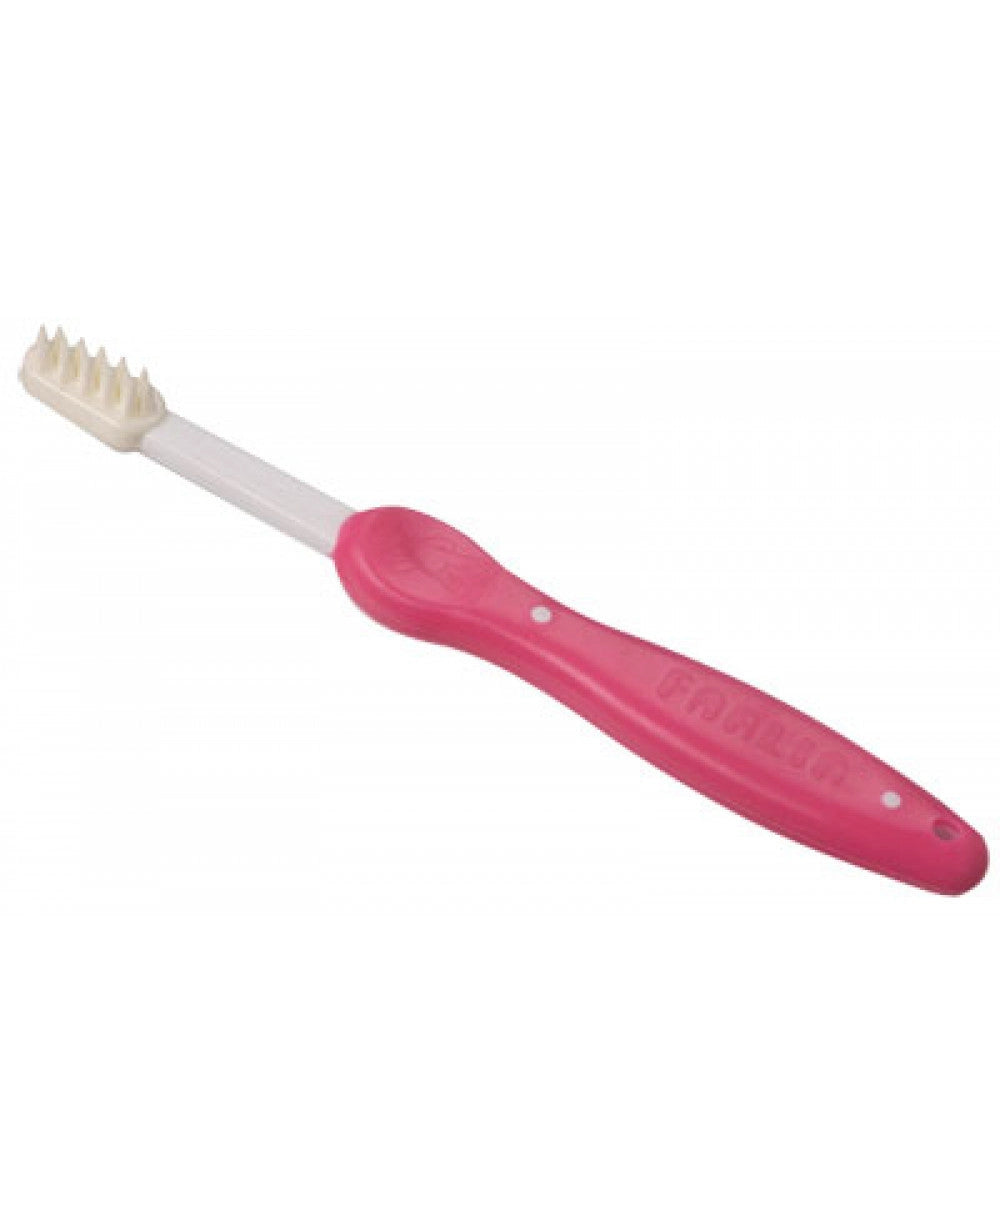 Farlin Second Stage Toothbrush